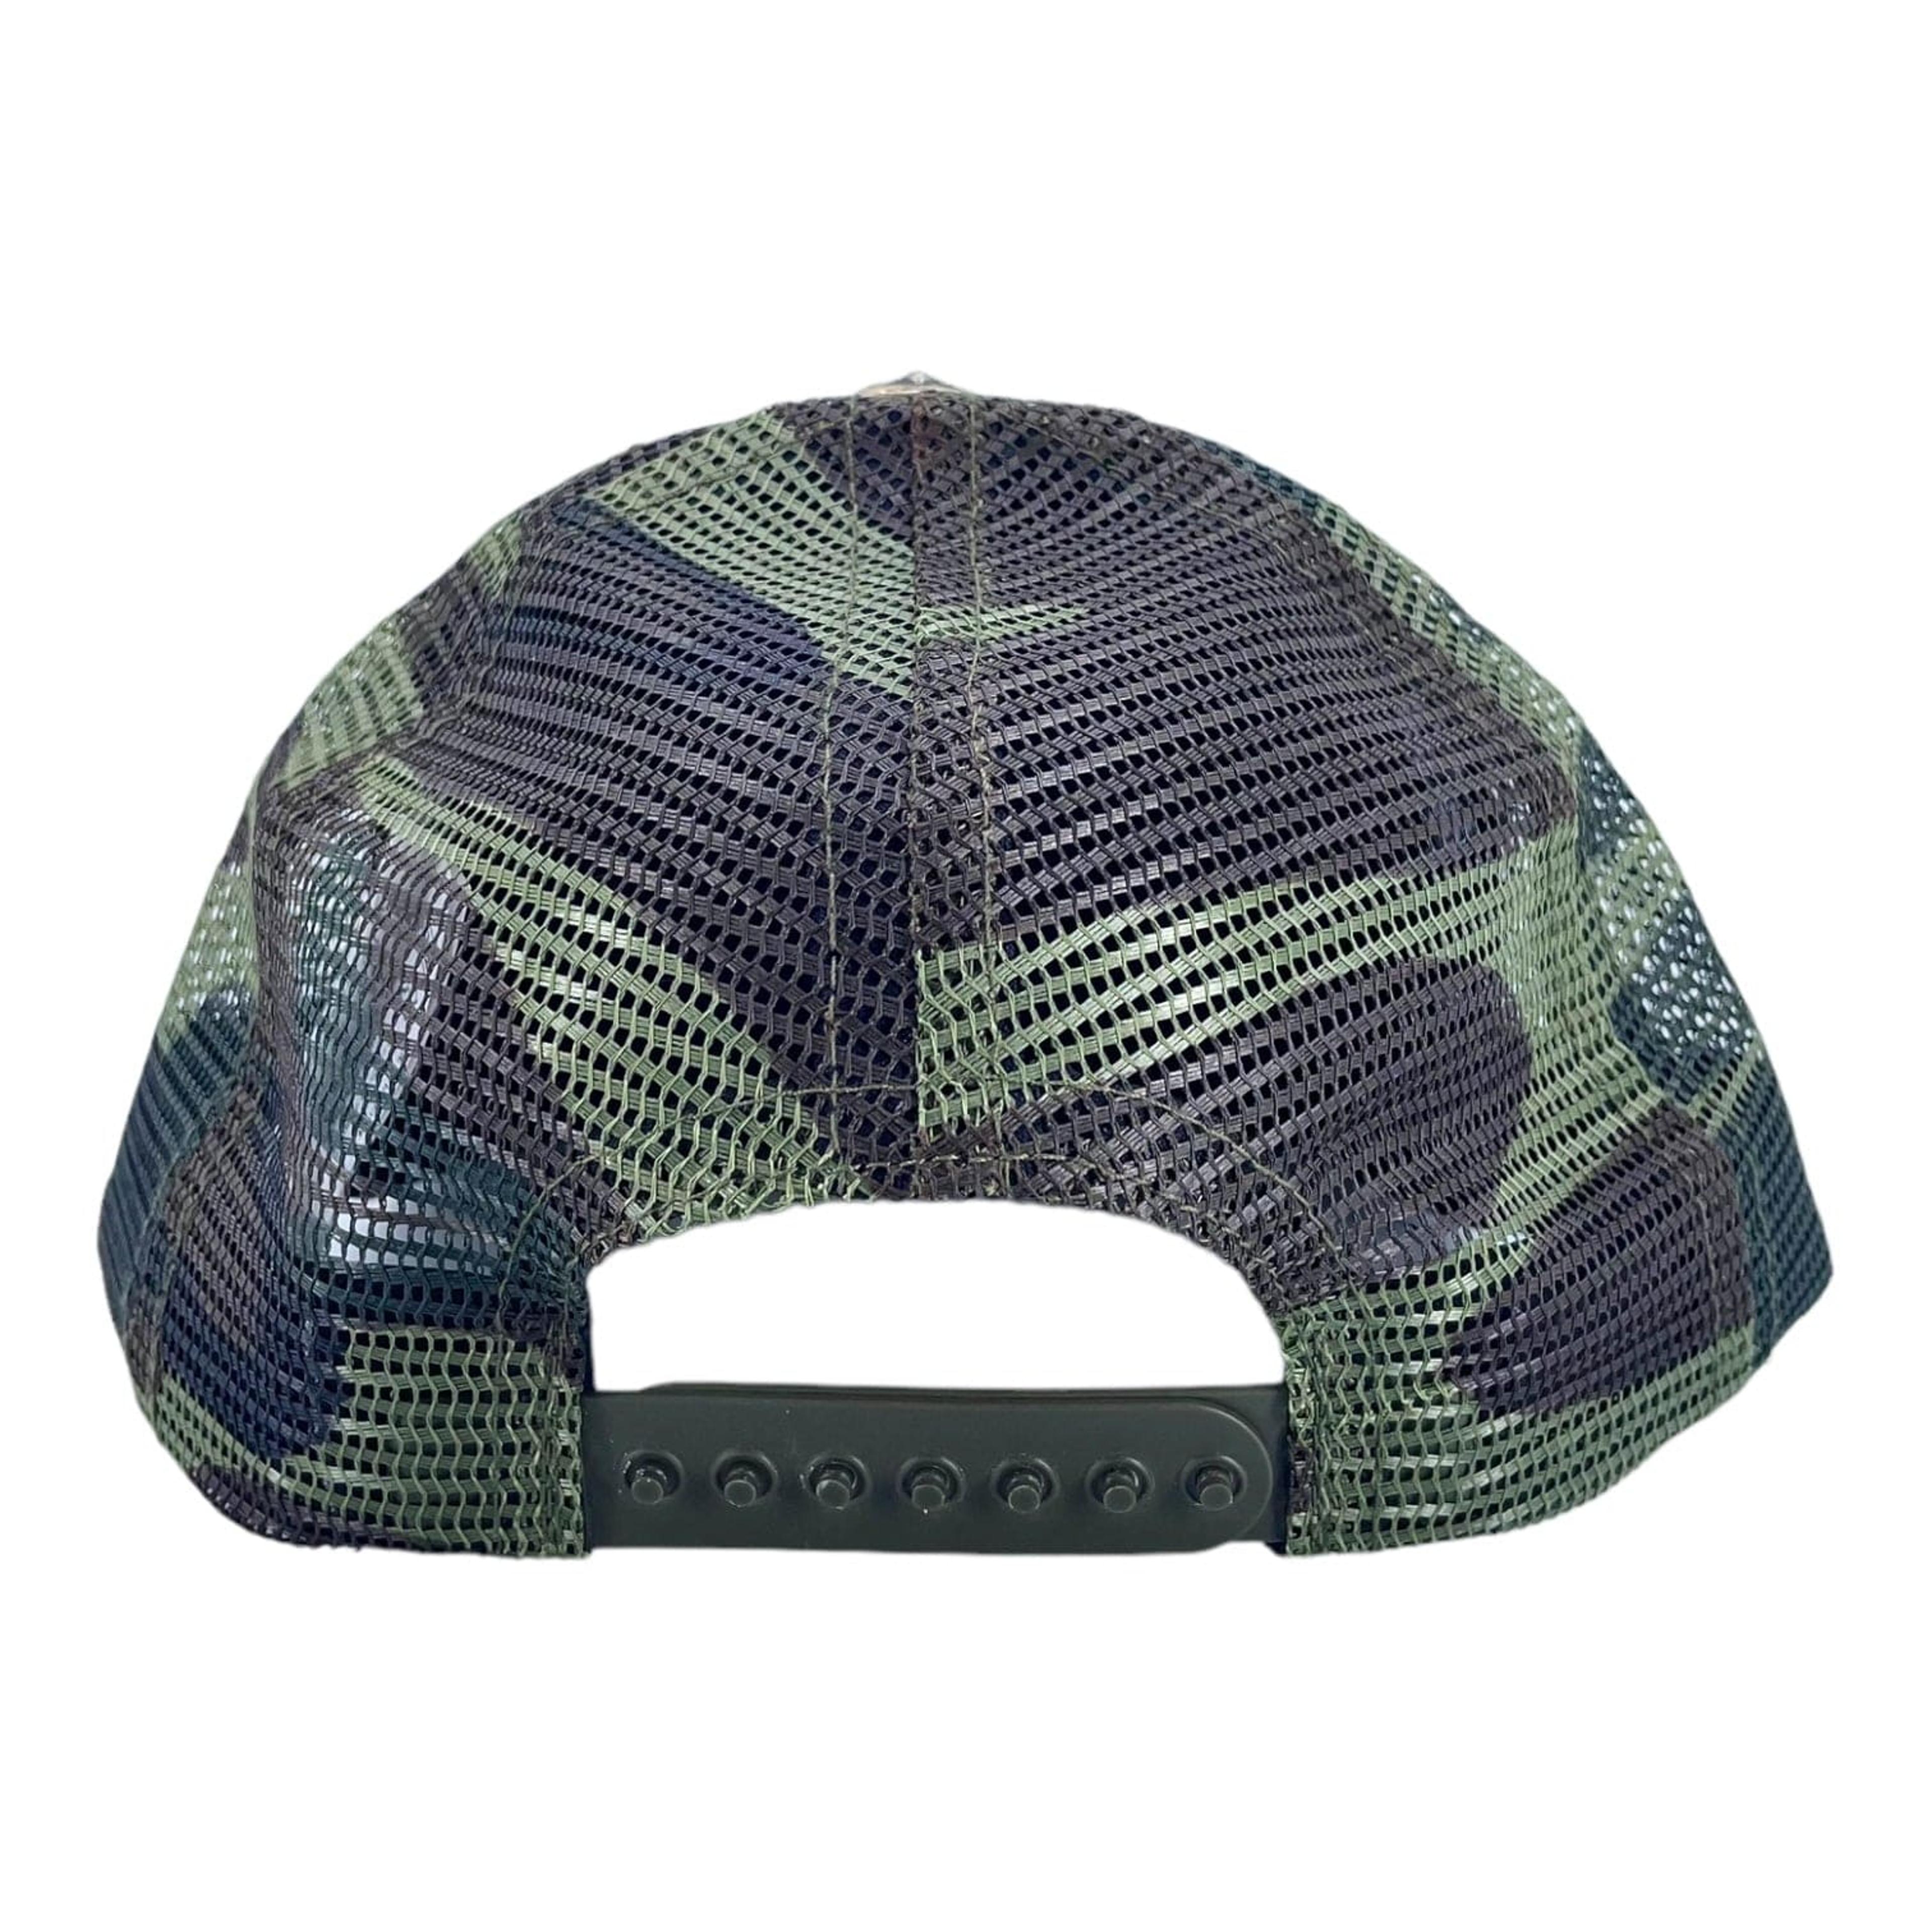 Alternate View 5 of Chrome Hearts CH Hollywood Trucker Hat Camo